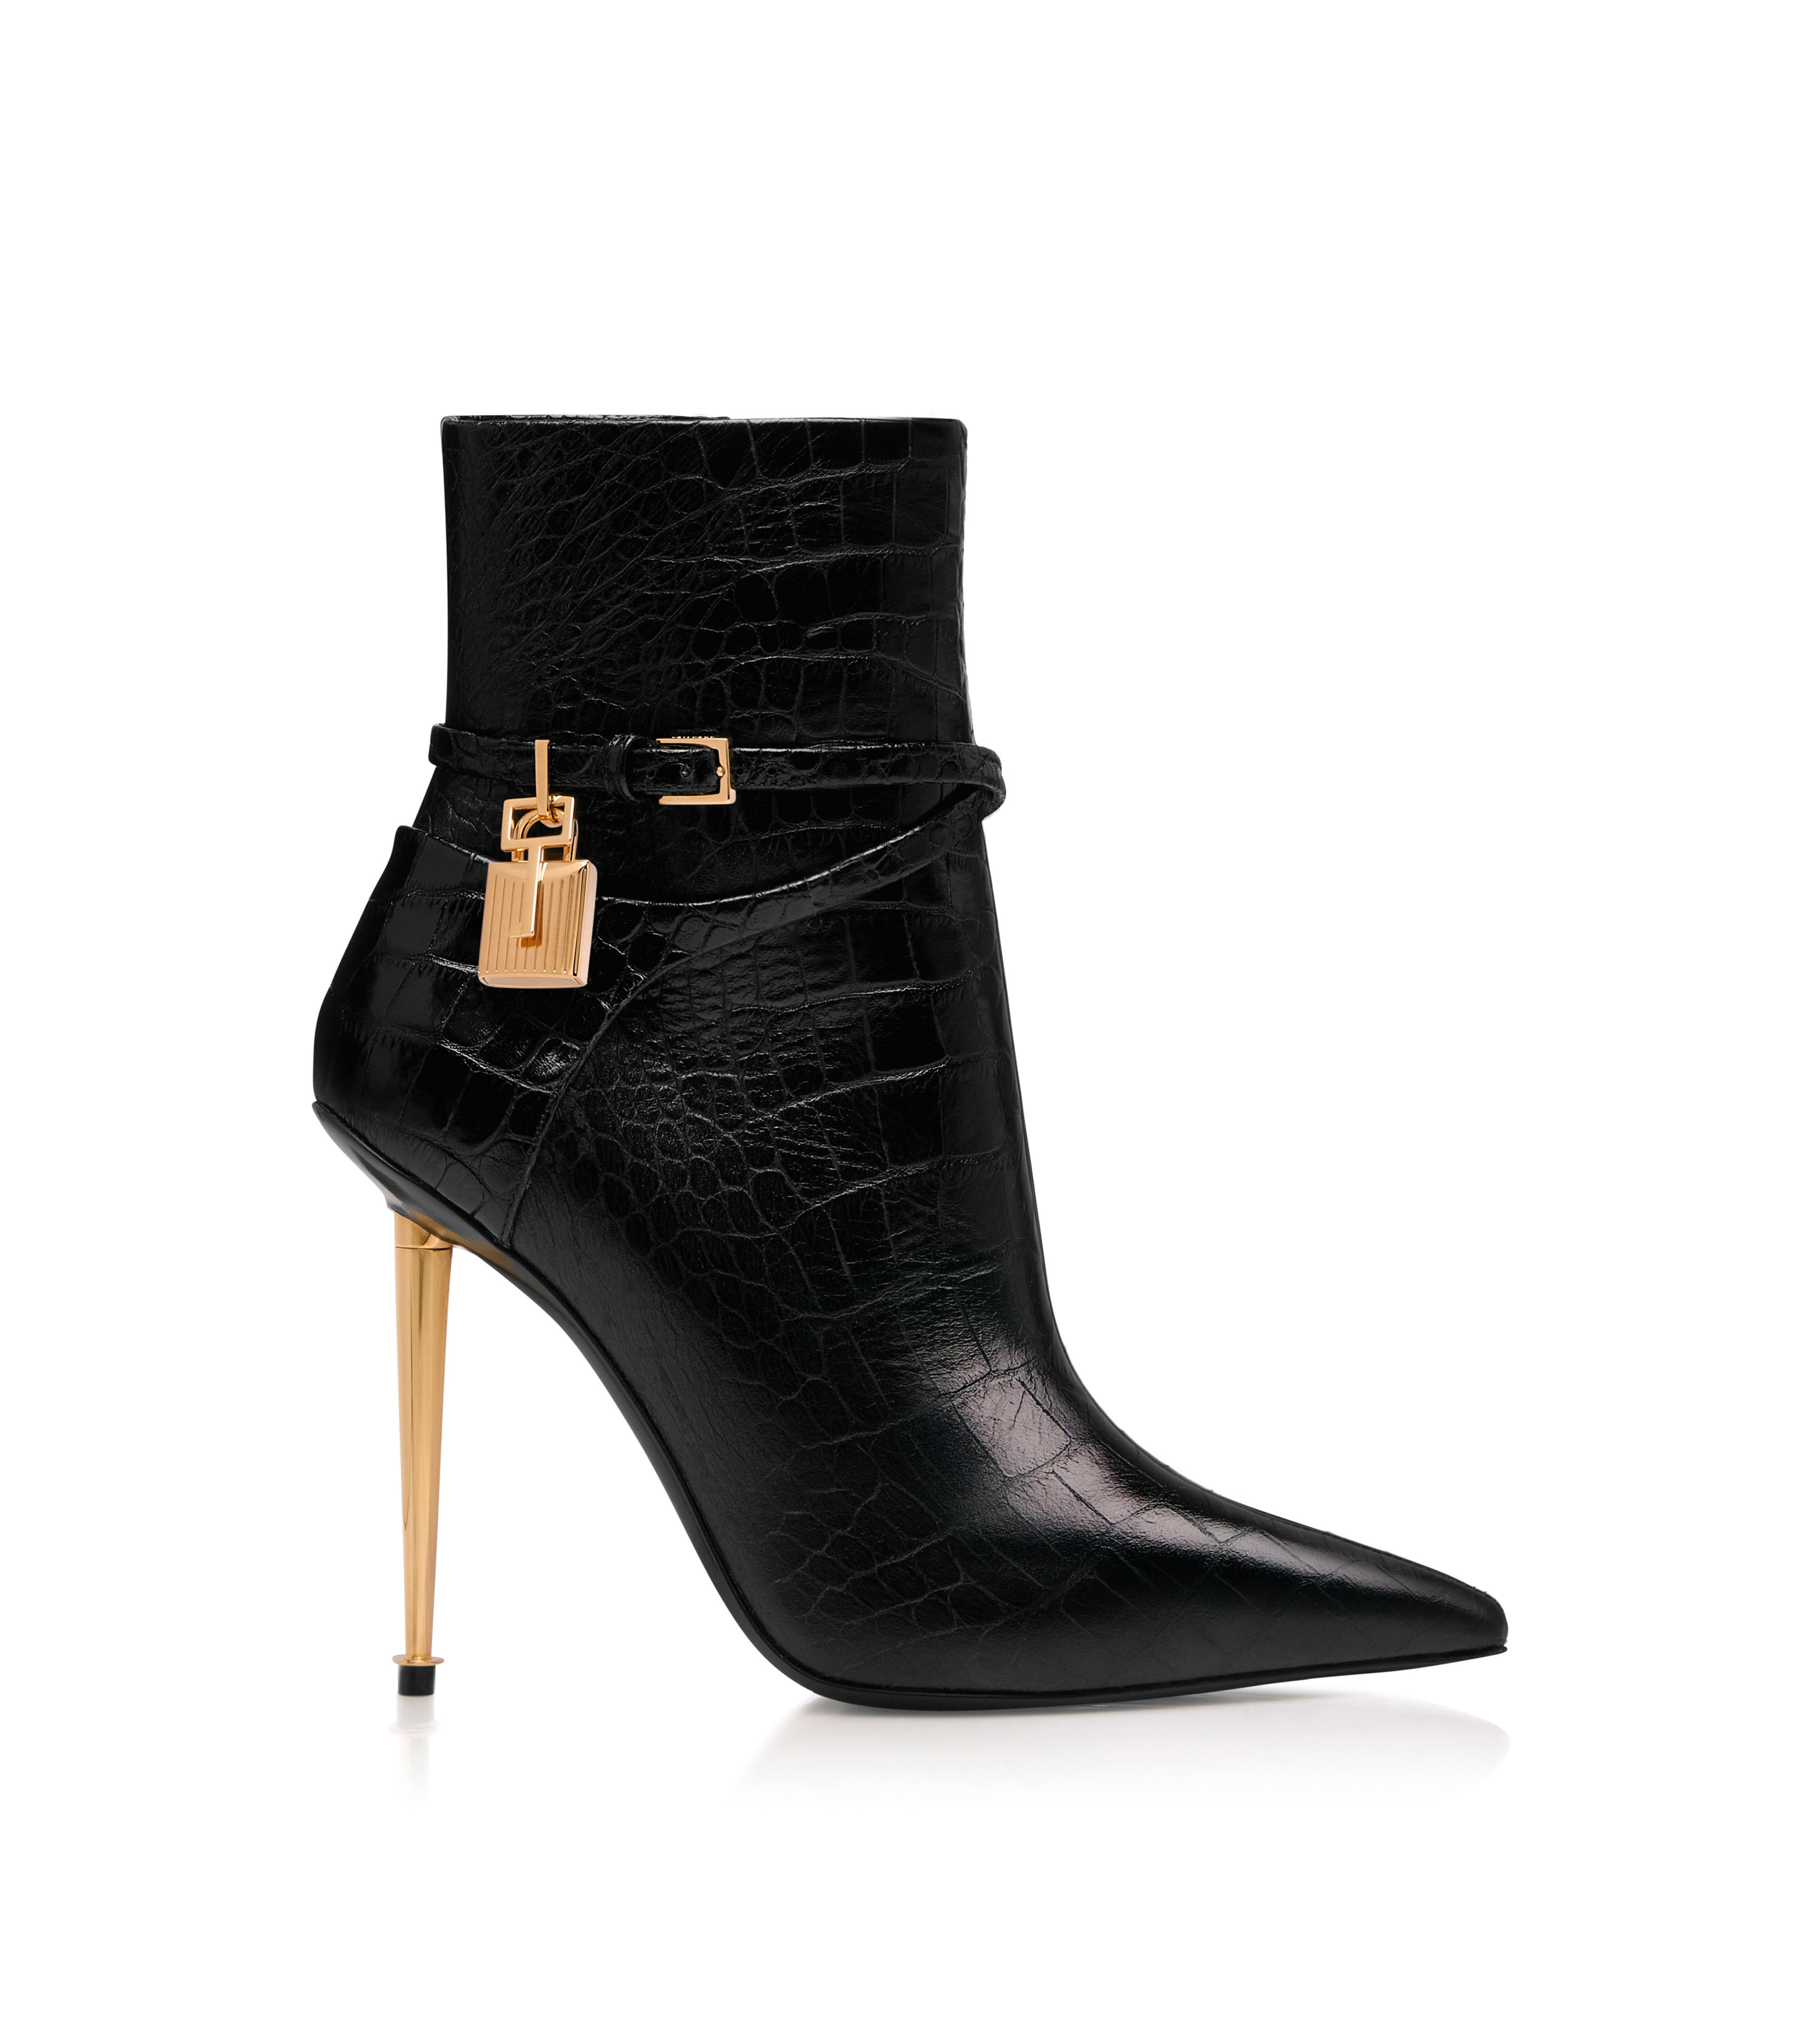 Boots Women's Shoes | TomFord.com